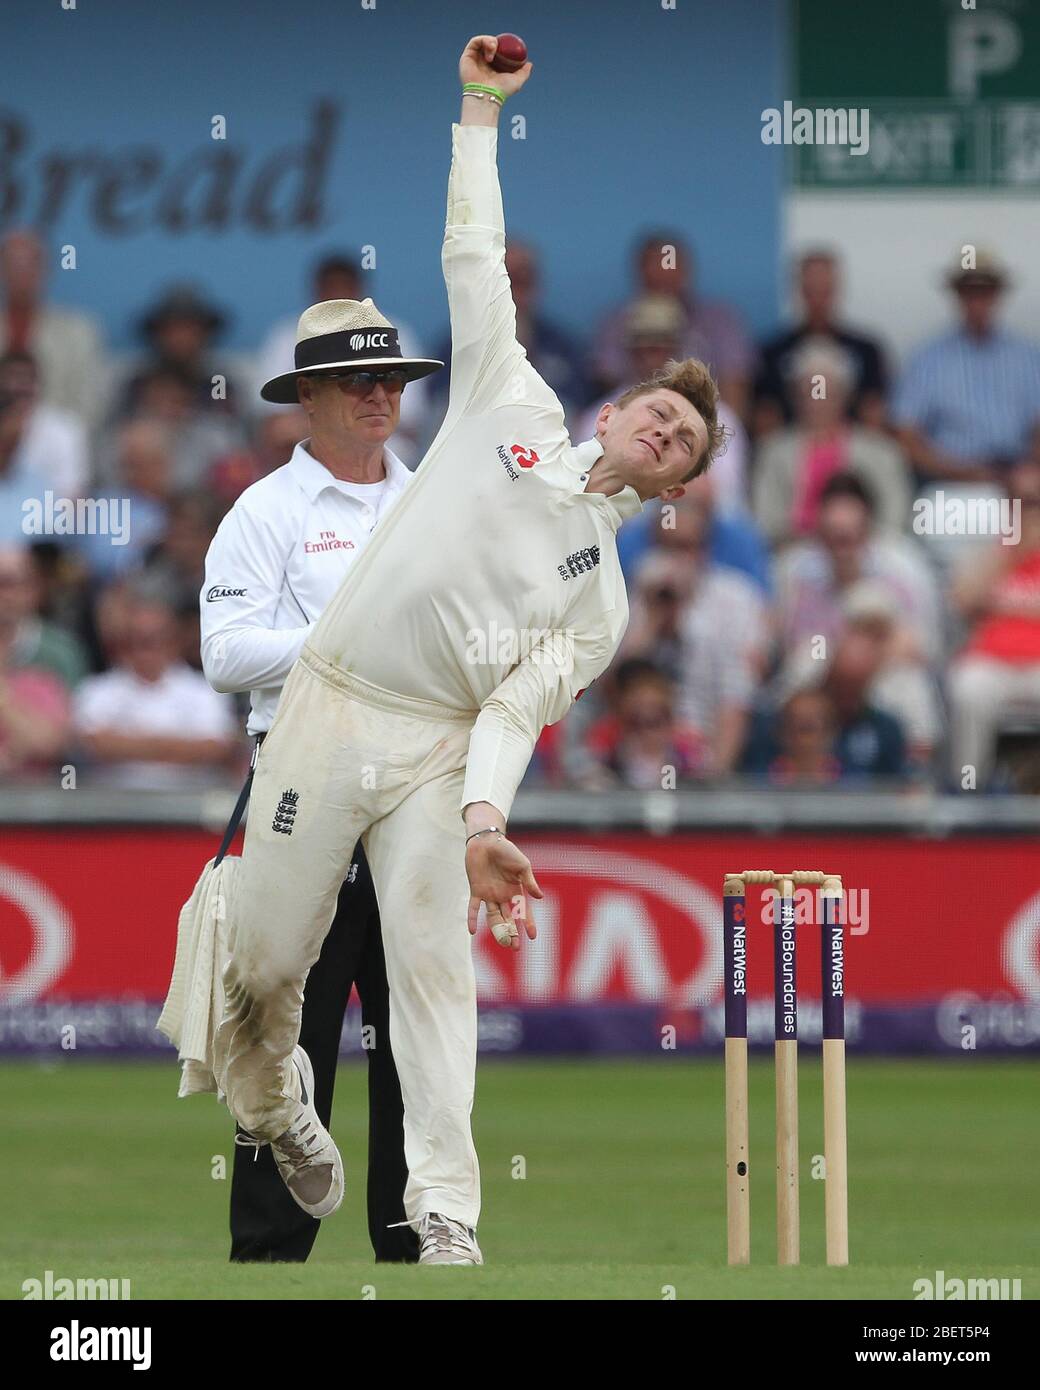 LEEDS, UK - JUNE 3rd Dom Bess of England bowling during the third day of the Second Nat West Test match between England and Pakistan at Headingley Cricket Ground, Leeds on Sunday 3rd June 2018. (Credit: Mark Fletcher | MI News) Stock Photo